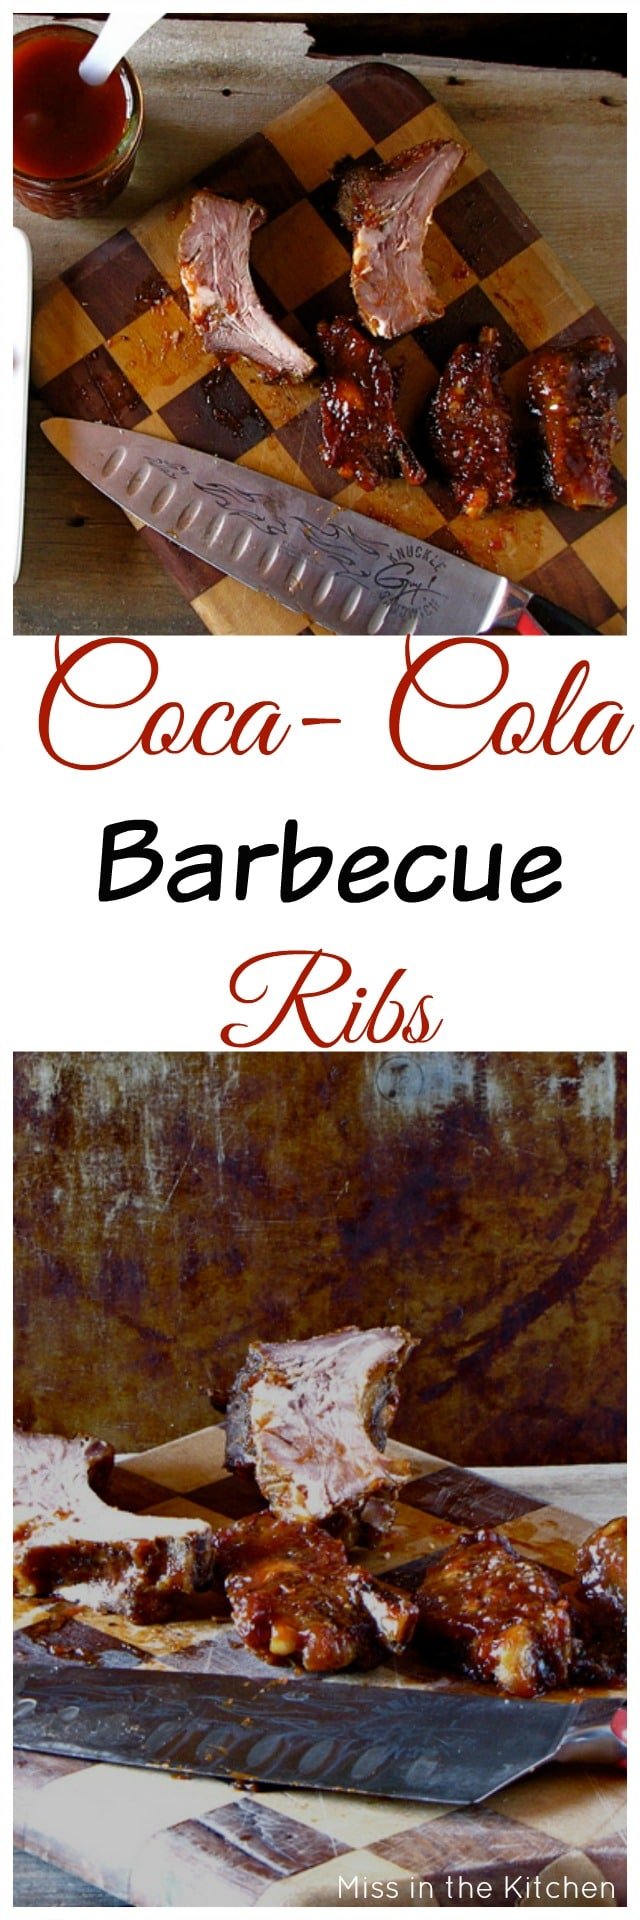 Coca~Cola Barbecue Ribs Recipe from Miss in the Kitchen